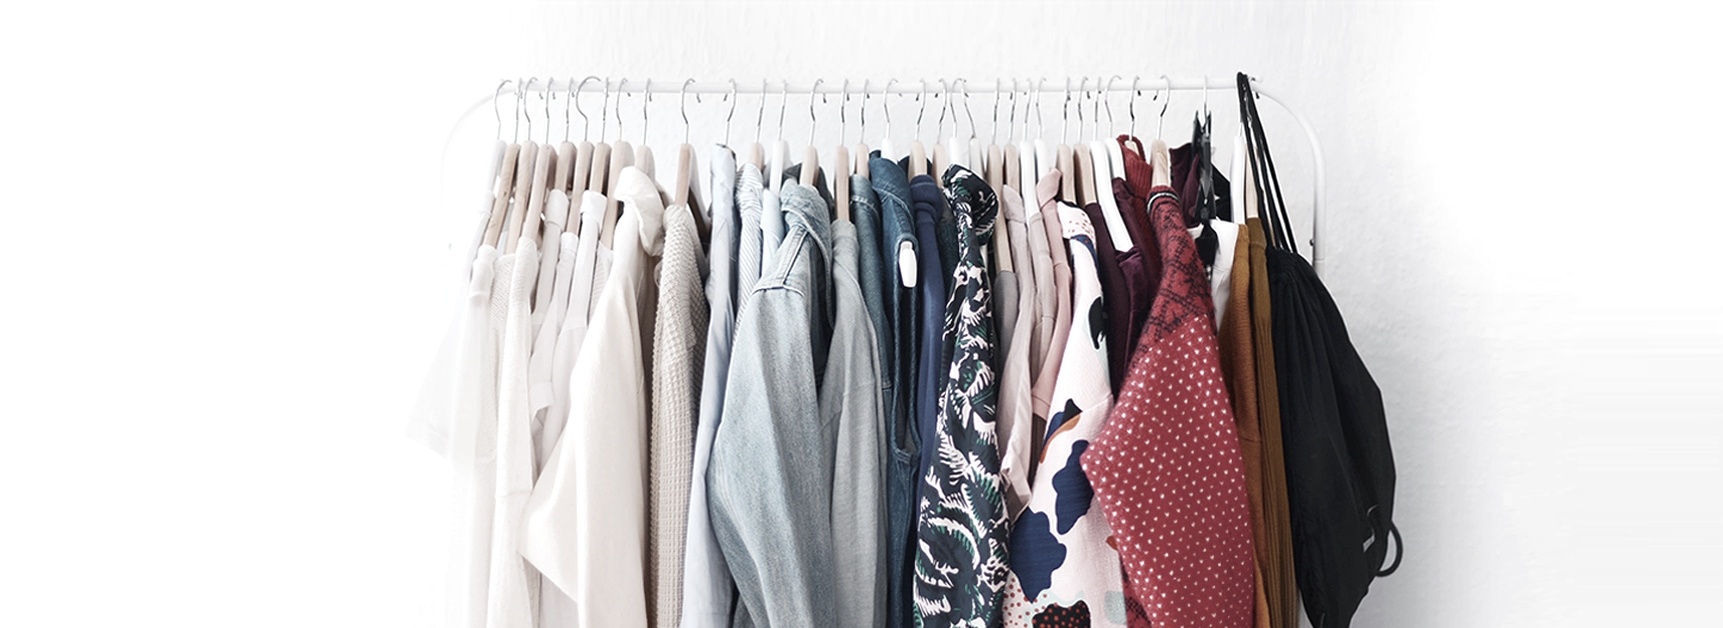 21 Stores Like SheIn for Affordable, Trendy Clothes